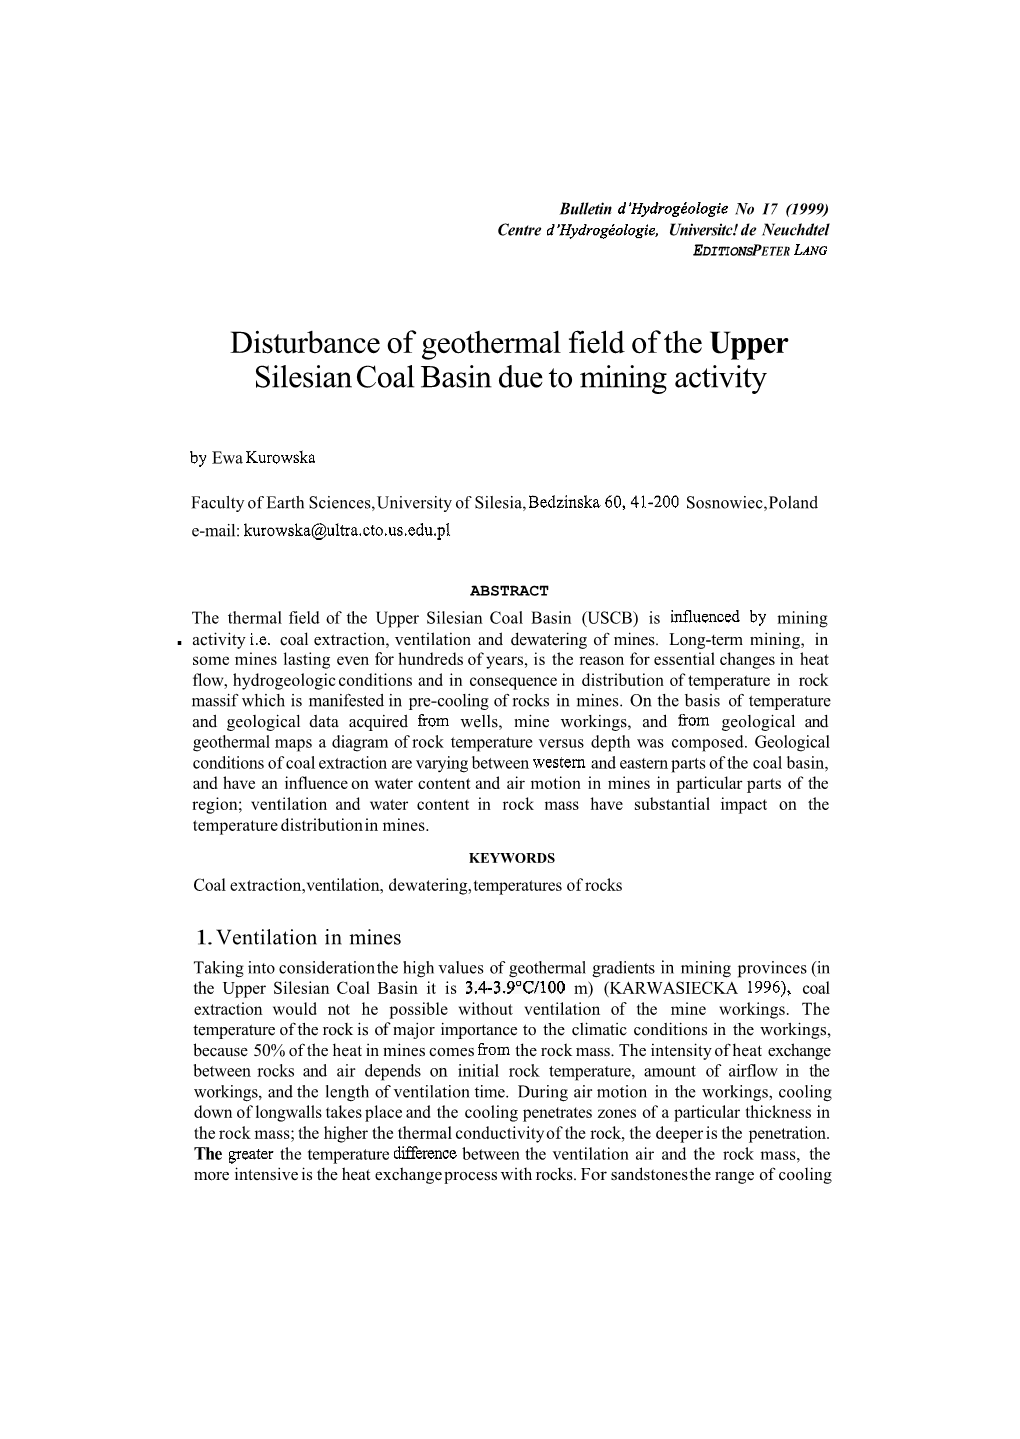 Disturbance of Geothermal Field of the Upper Silesian Coal Basin Due to Mining Activity